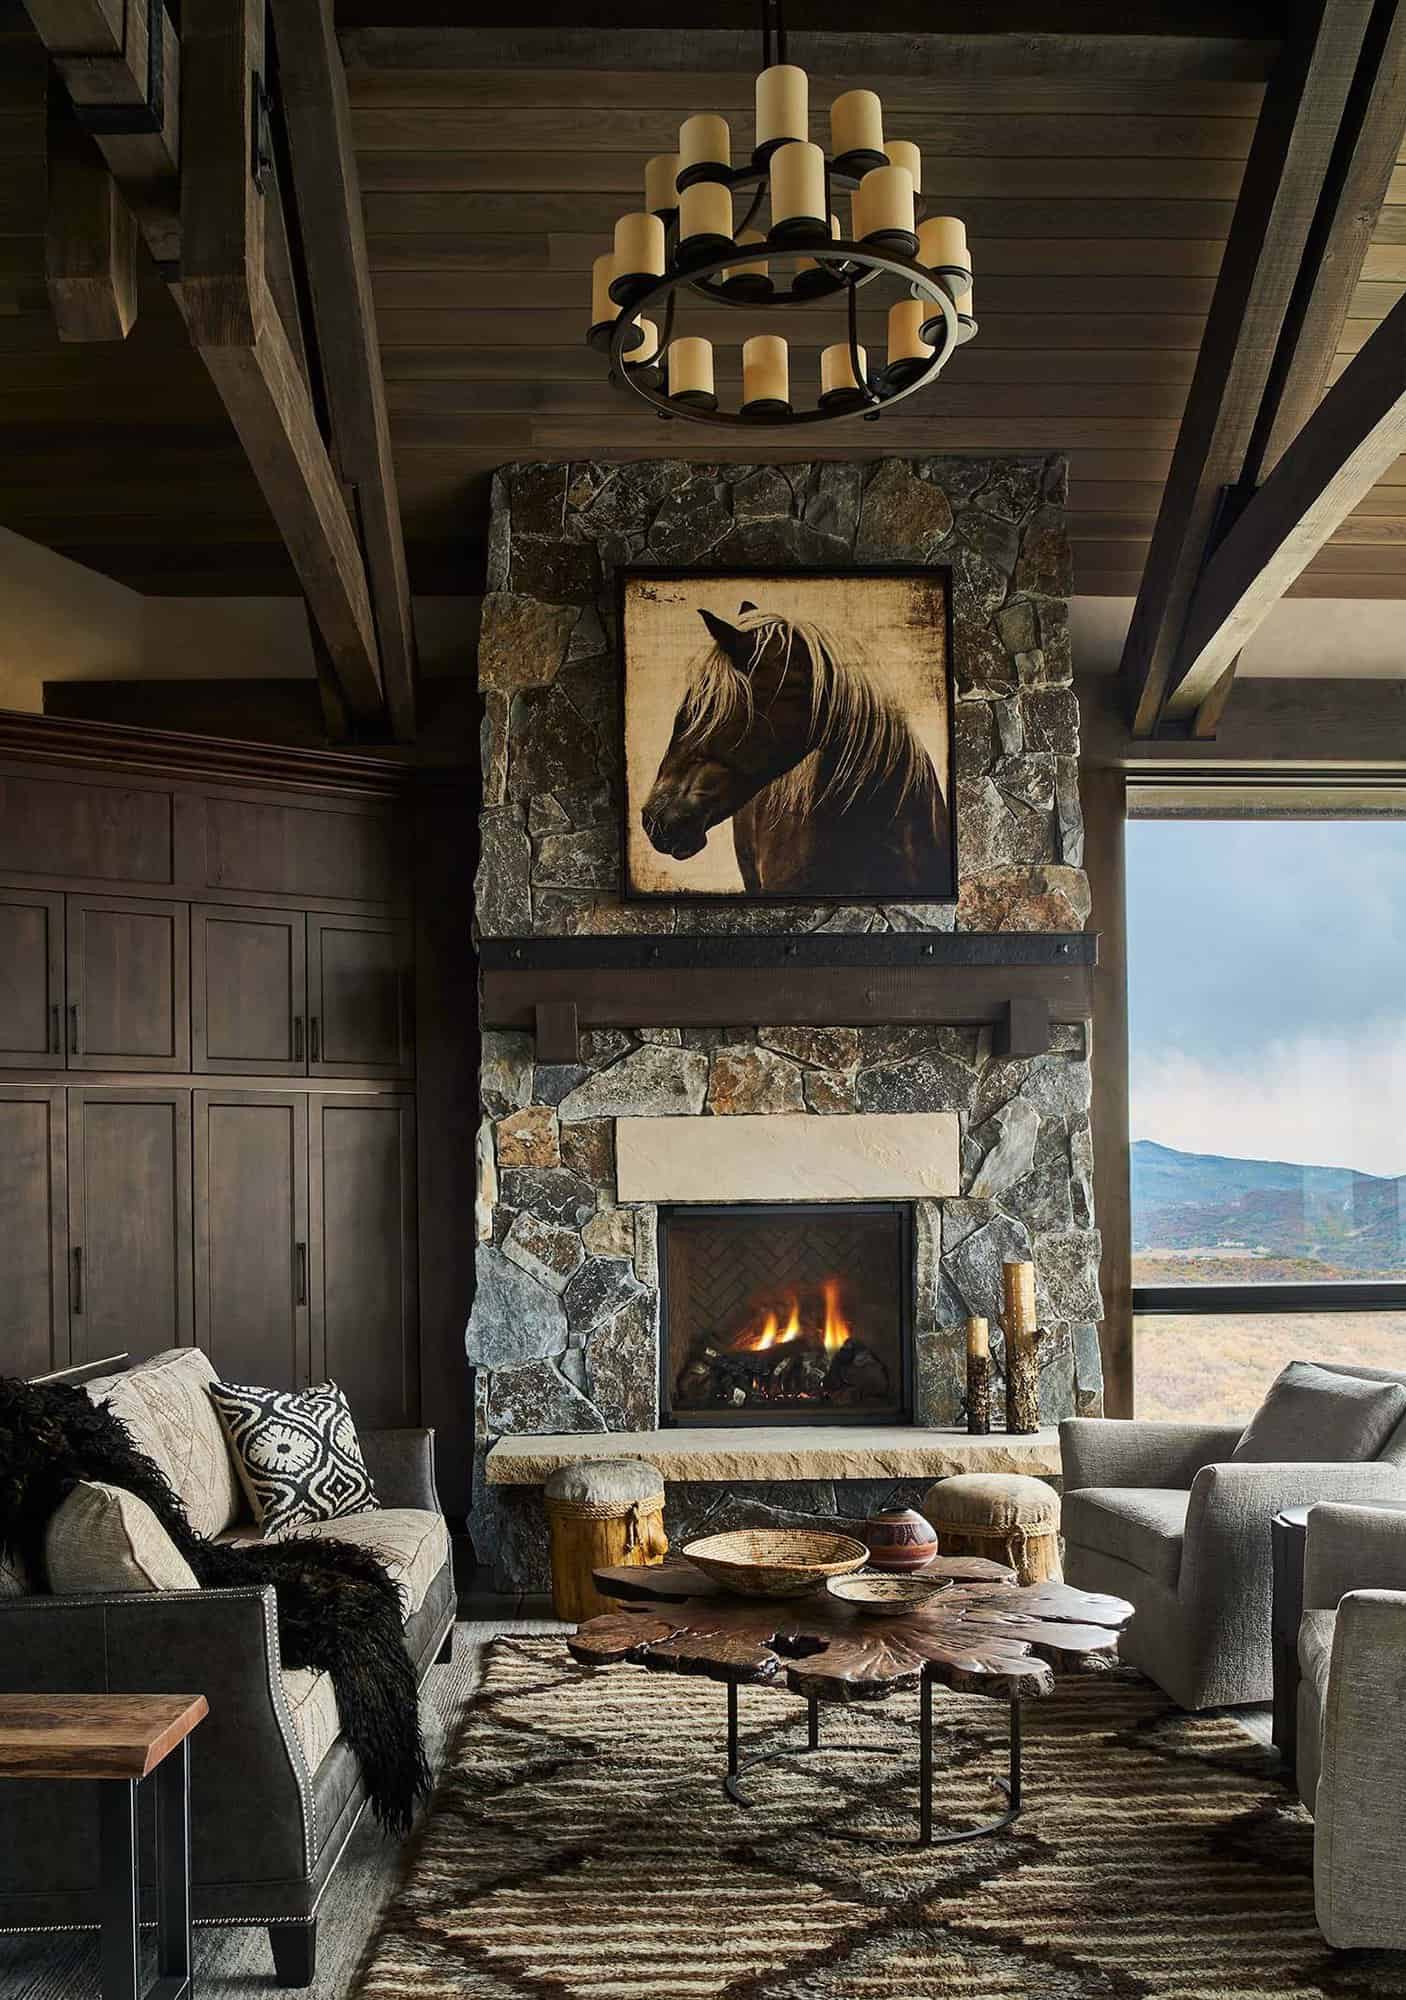 Rustic meets fashionable on this lovely Colorado mountain sanctuary